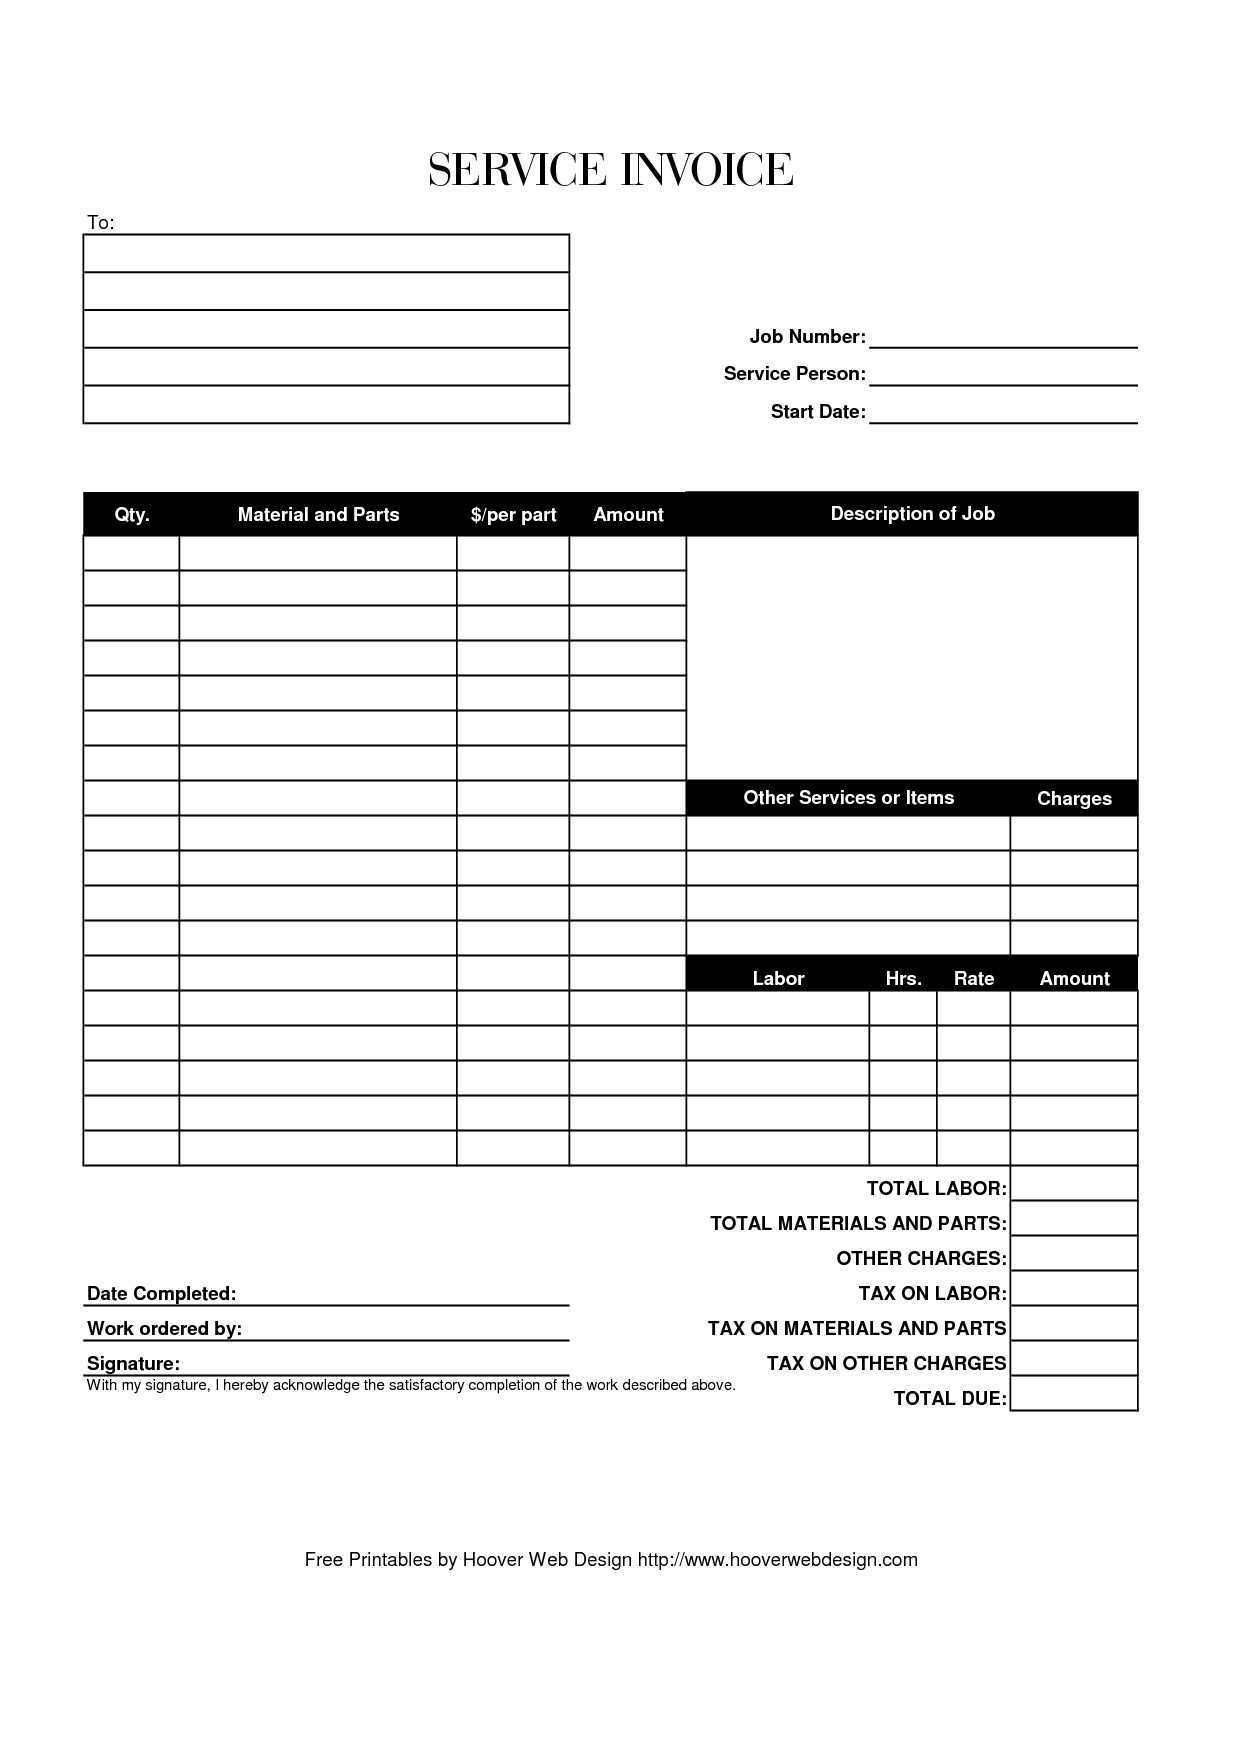 39 Report Blank Invoice Template For Services In Word With Blank Invoice Template For Services Cards Design Templates